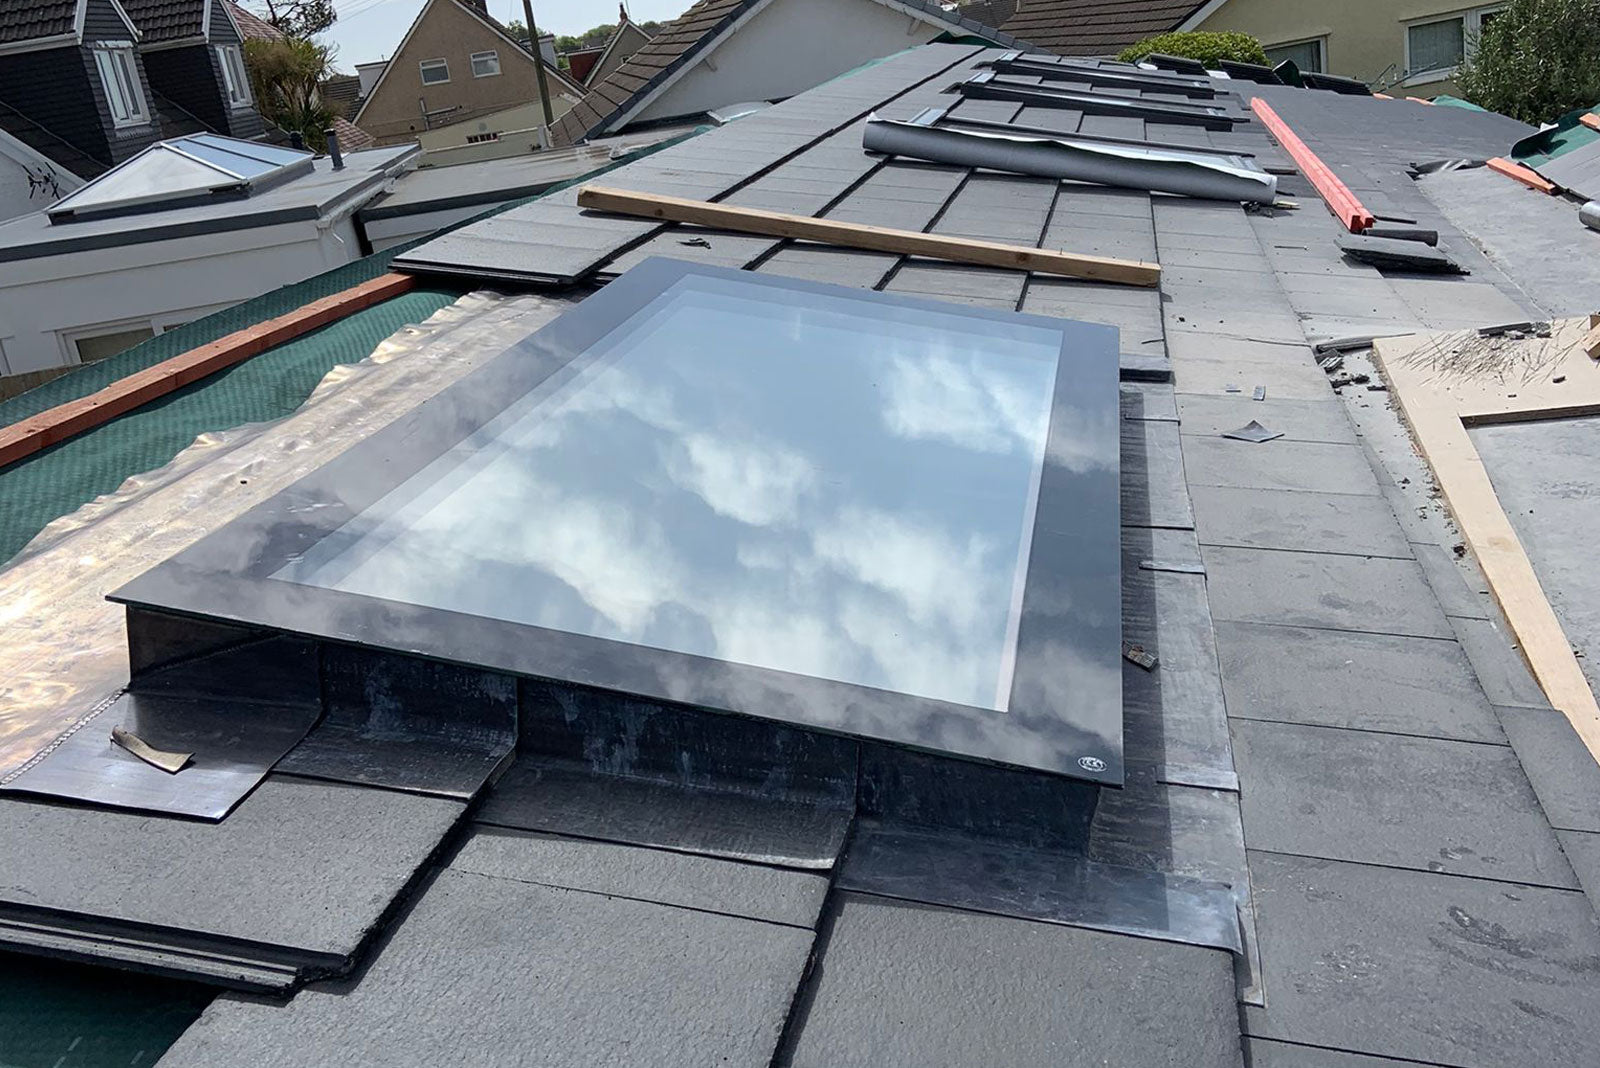 Pitched Roof Skylight 400 x 3000mm